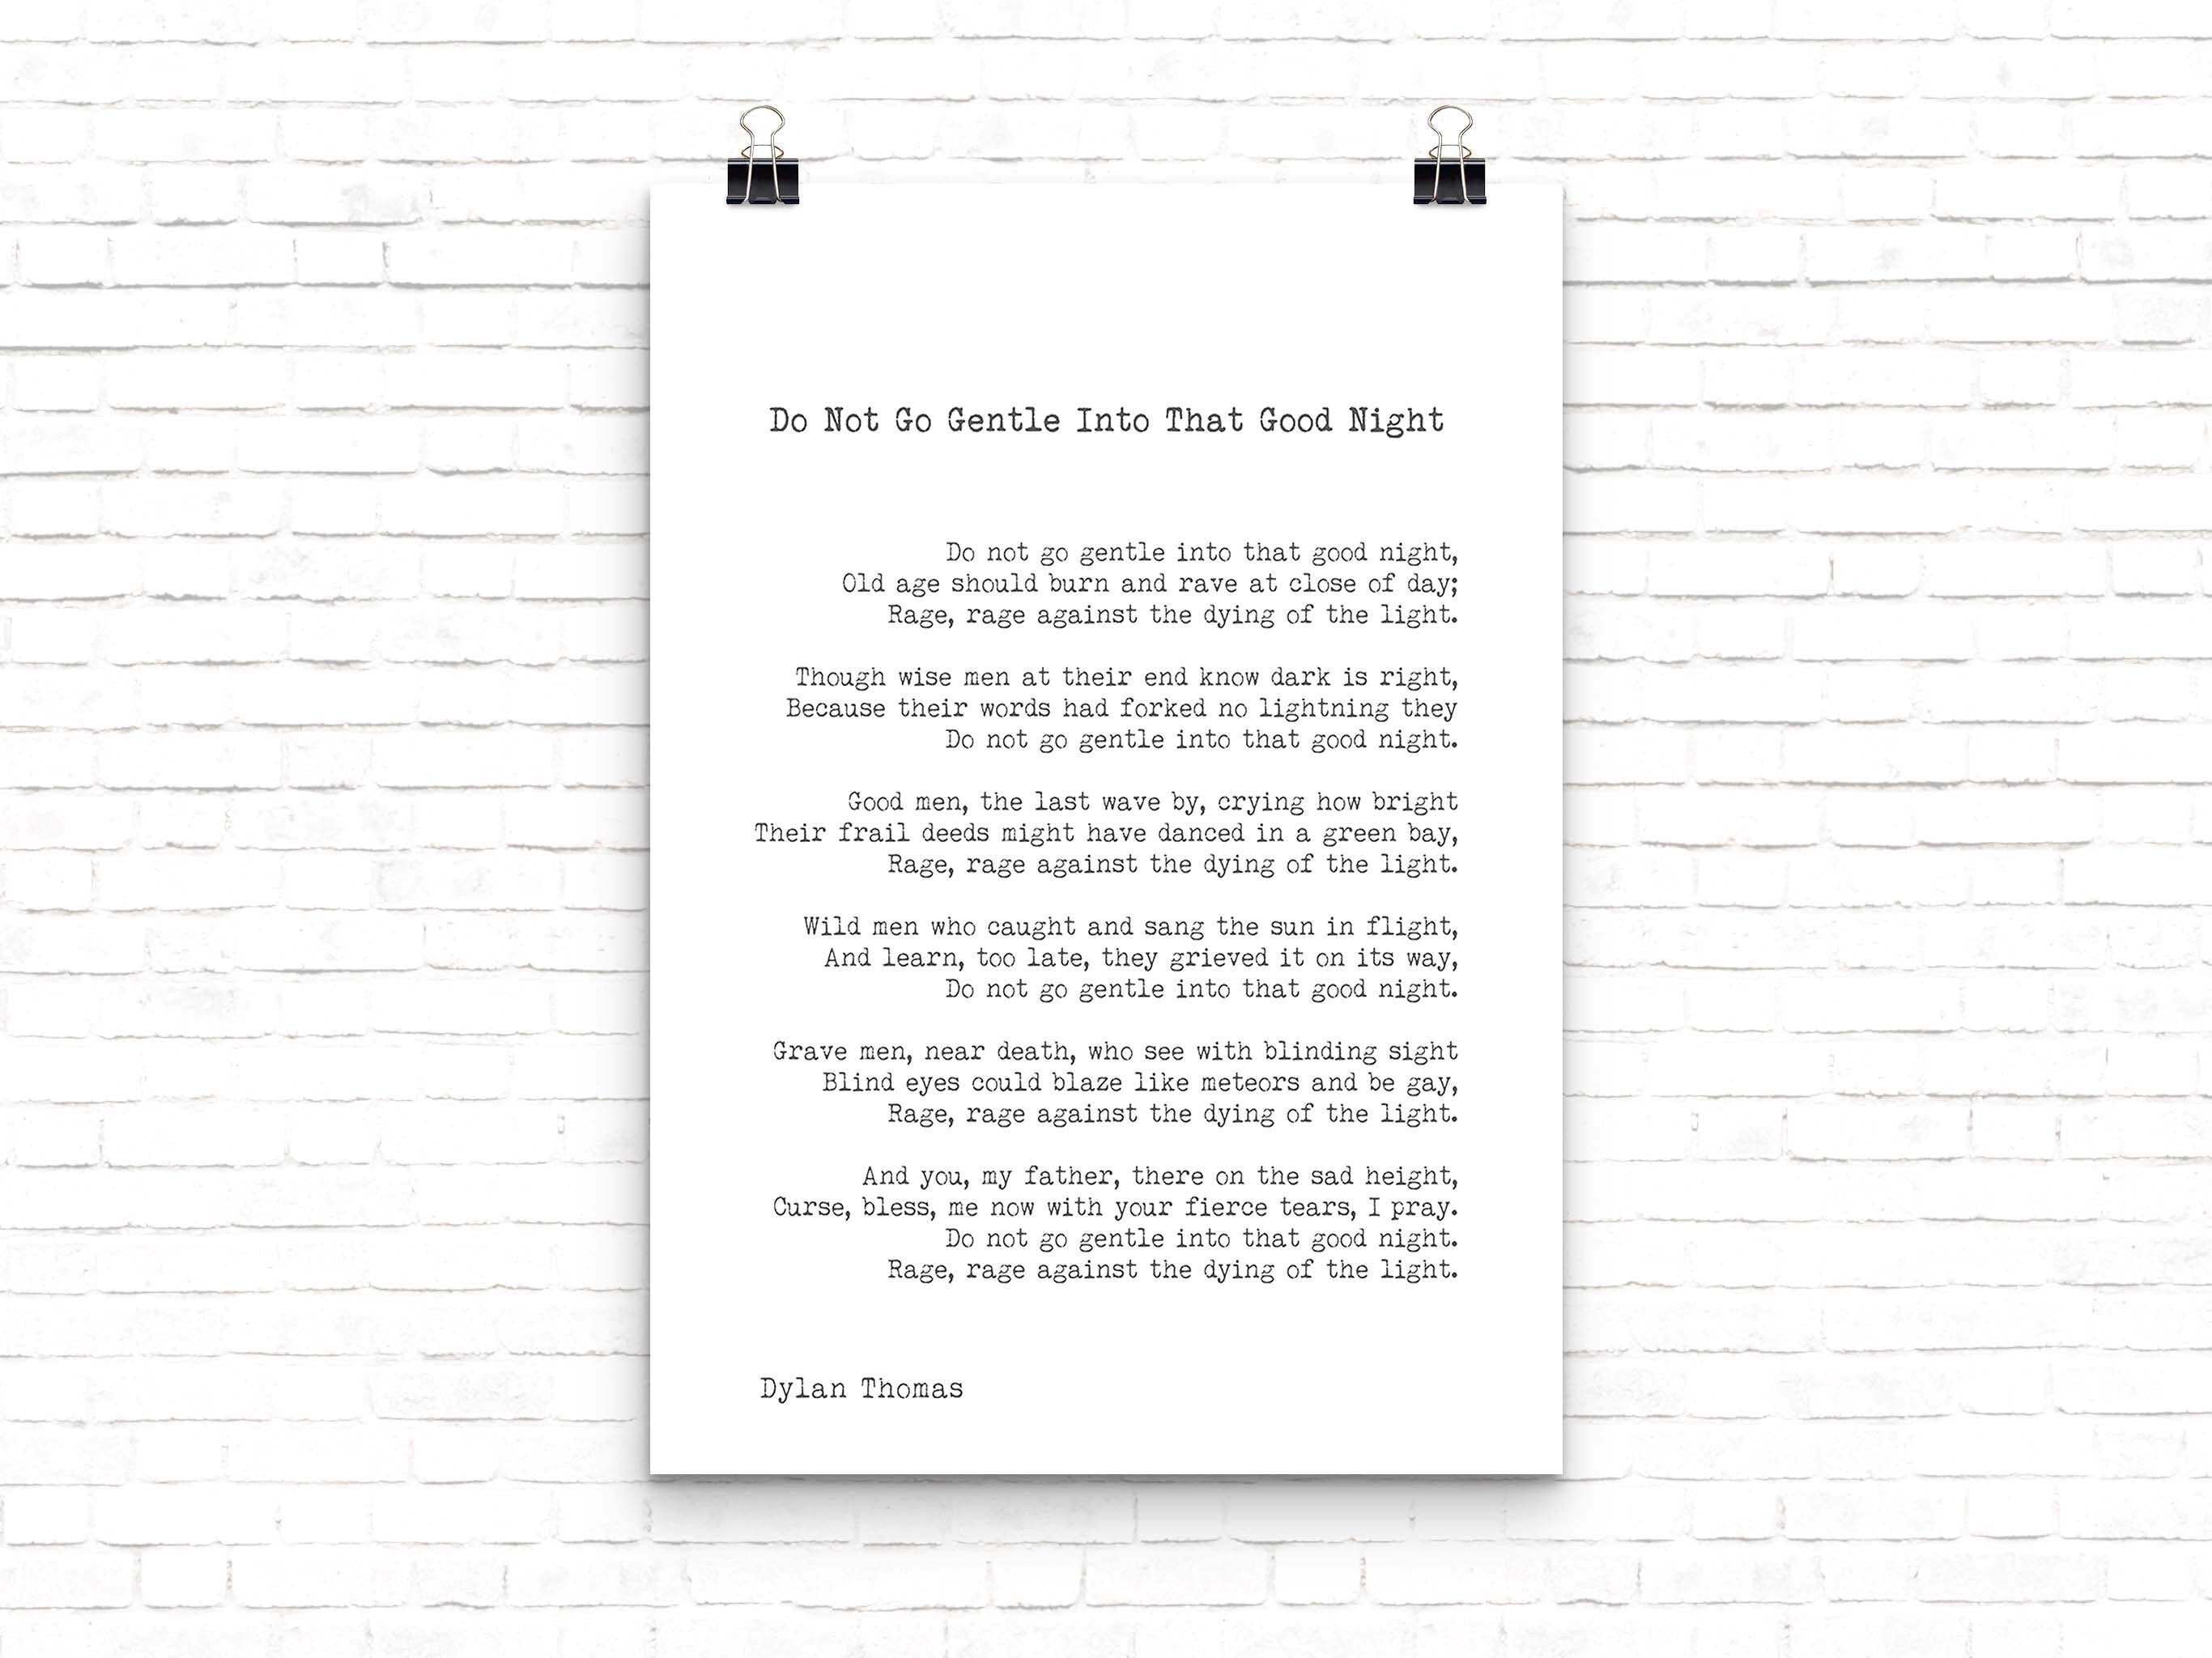 Dylan Thomas Poem Print, Do Not Go Gentle Into That Good Night Poetry Poster In Black & White For Home Wall Decor